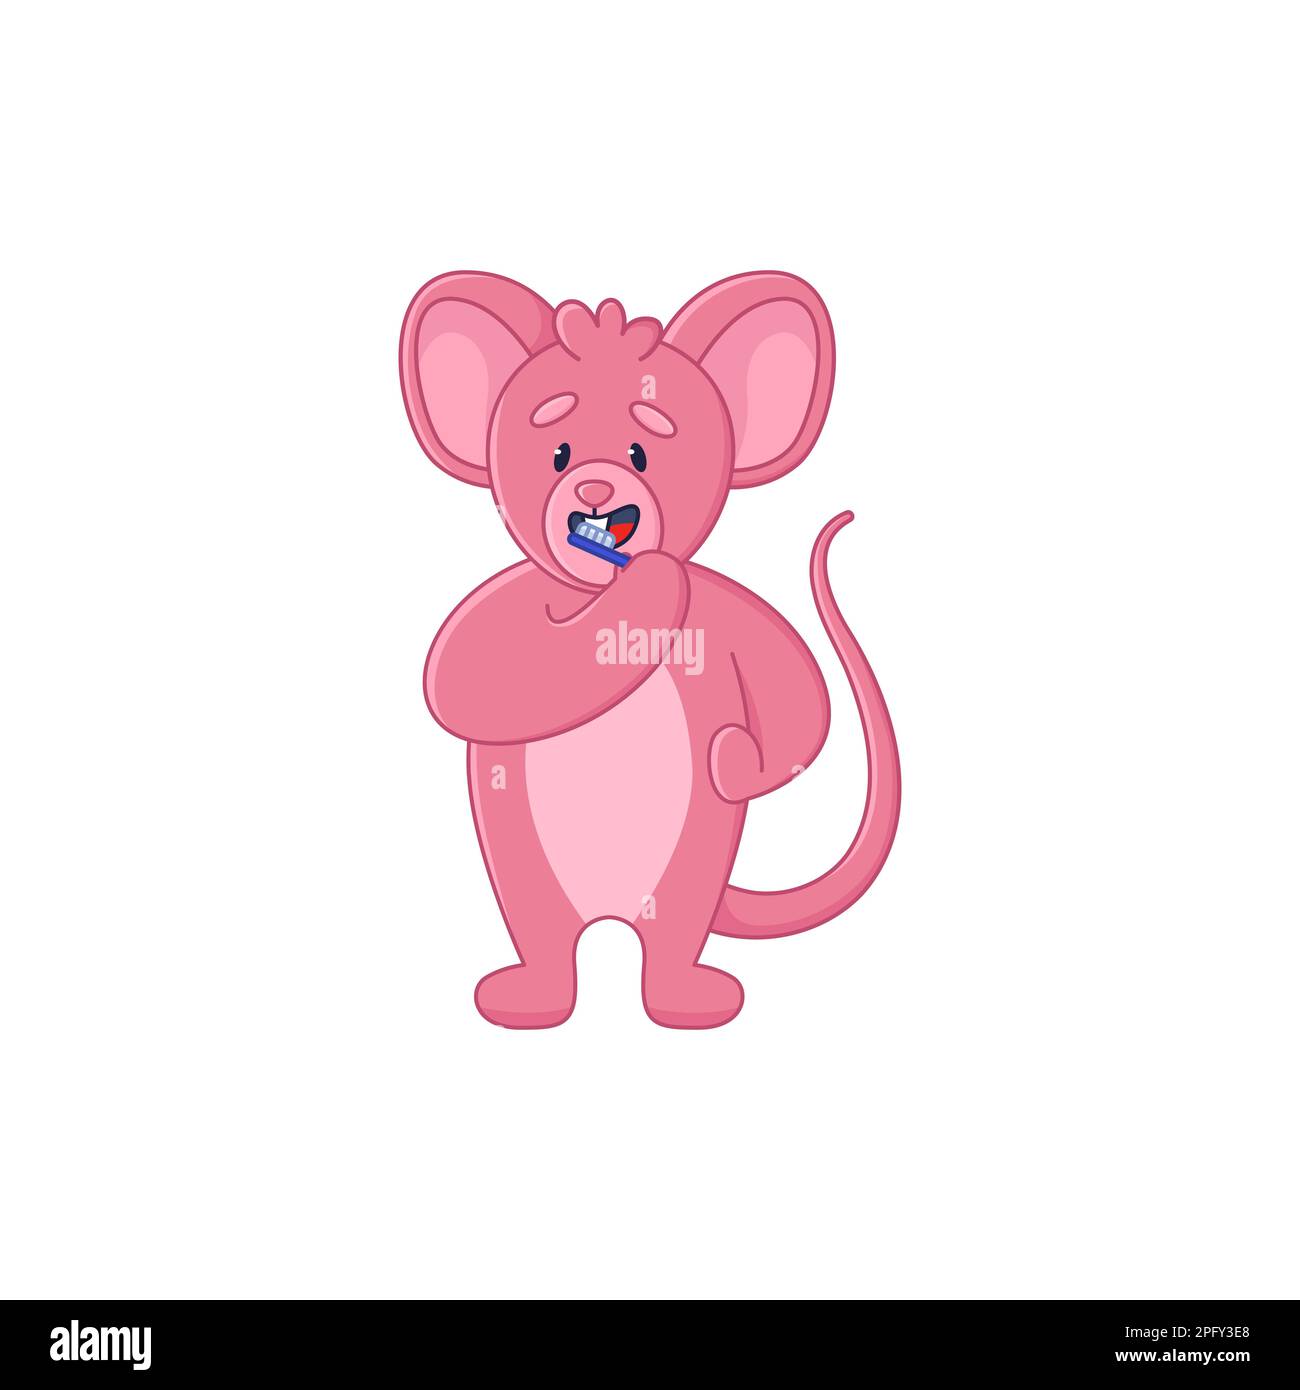 Cute pink mouse cartoon character brushing teeth sticker Stock Vector